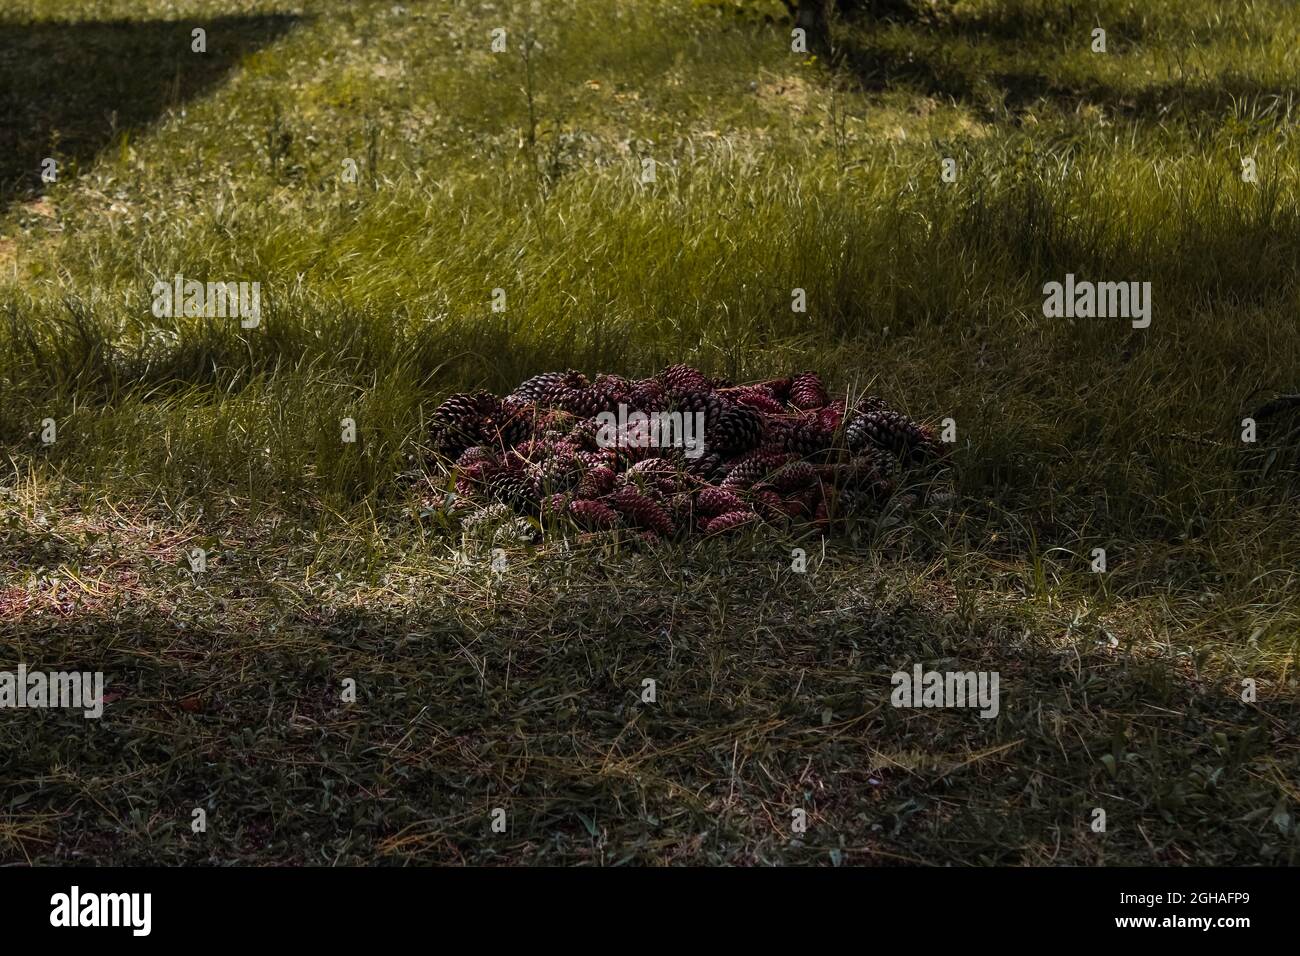 Pine cones gathered together to start a shamanic ritual at the forest. Fine cone pile. Stock Photo